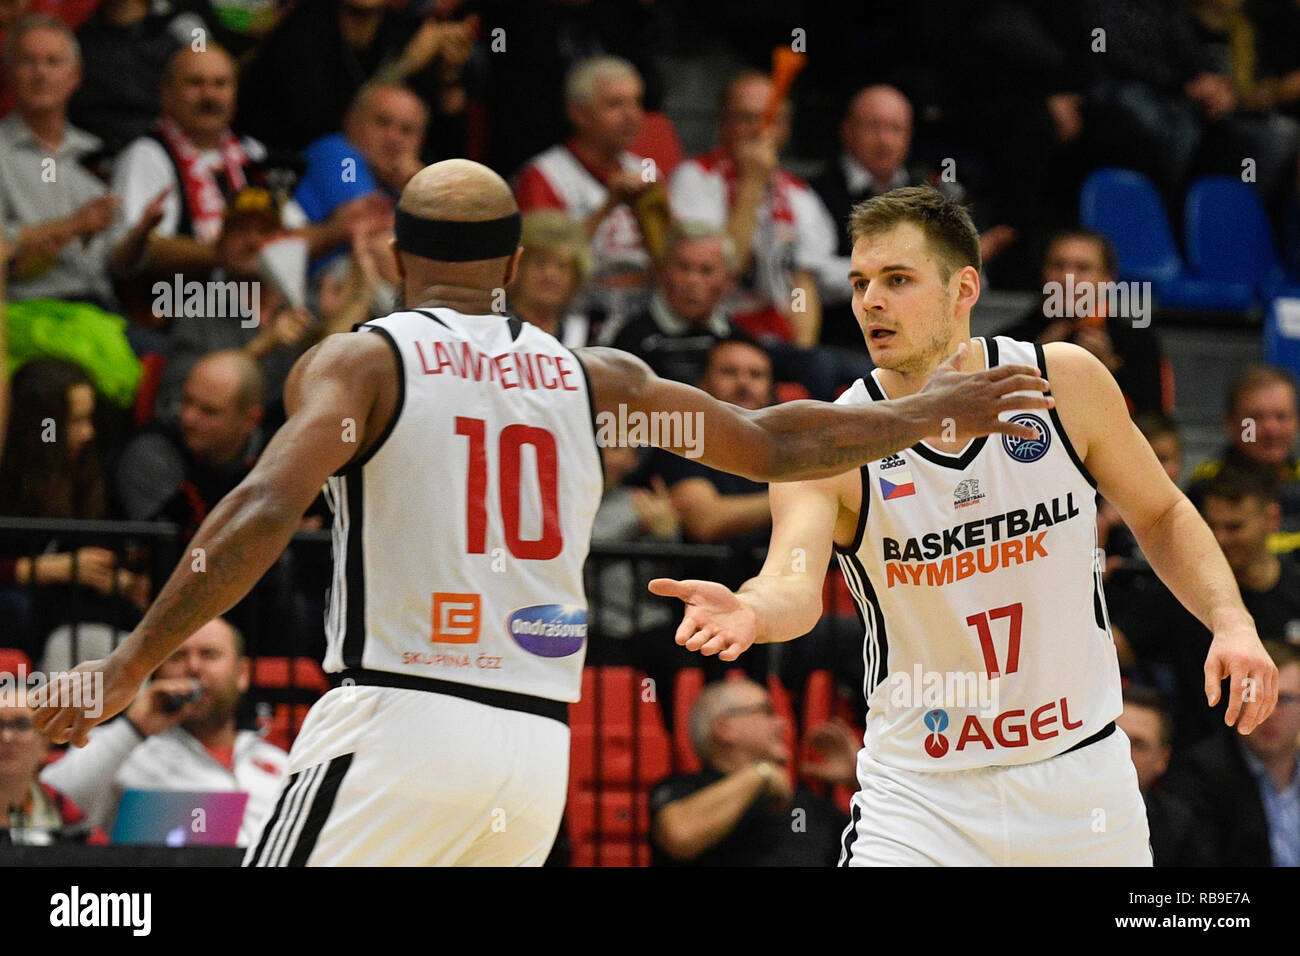 Nymburk, Czech Republic. 08th Jan, 2019. From right JAROMIR BOHACIK, EUGENE LAWRENCE both of Nymburk in action during Men's basketball Champions League, 10th round, Group C match Lietkabelis Panevezys of Lithuania vs. Czech CEZ Basketball Nymburk in Nymburk, Czech Republic, January 8, 2019. Credit: Michal Kamaryt/CTK Photo/Alamy Live News Stock Photo